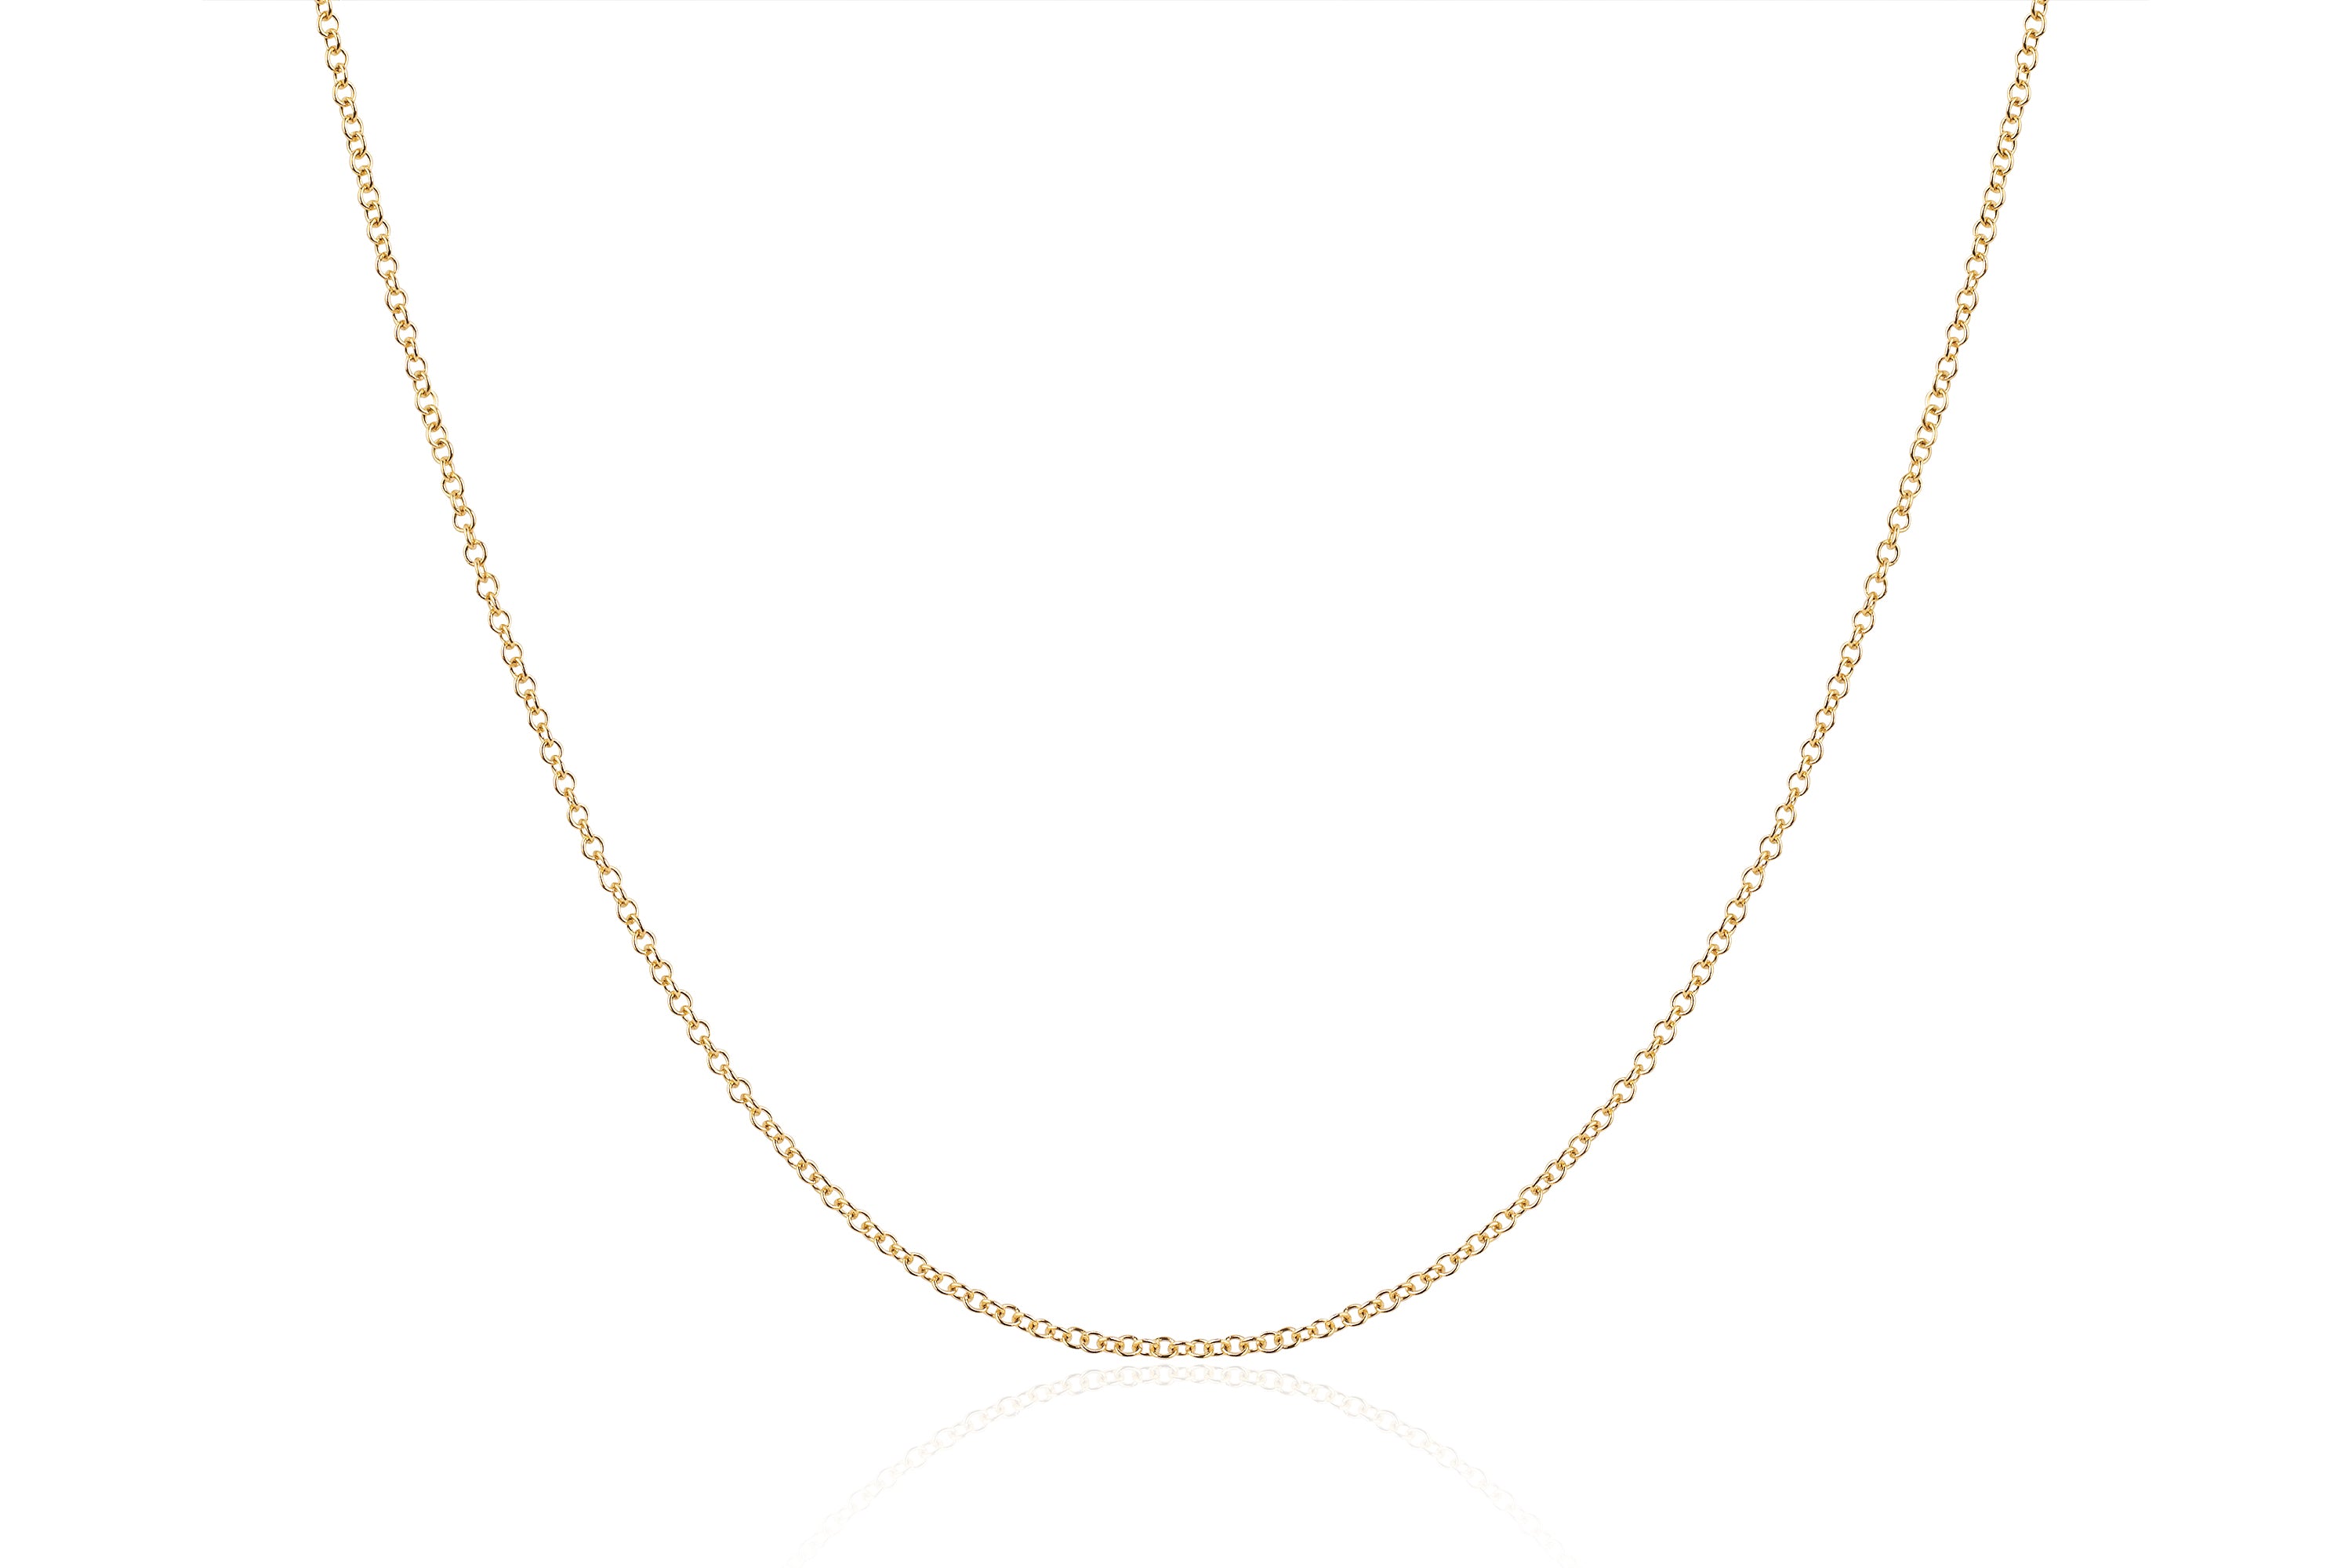 Men's 14k Solid Yellow Gold Figaro 4.7mm Chain Necklace - gold chain,  figaro chains, real gold